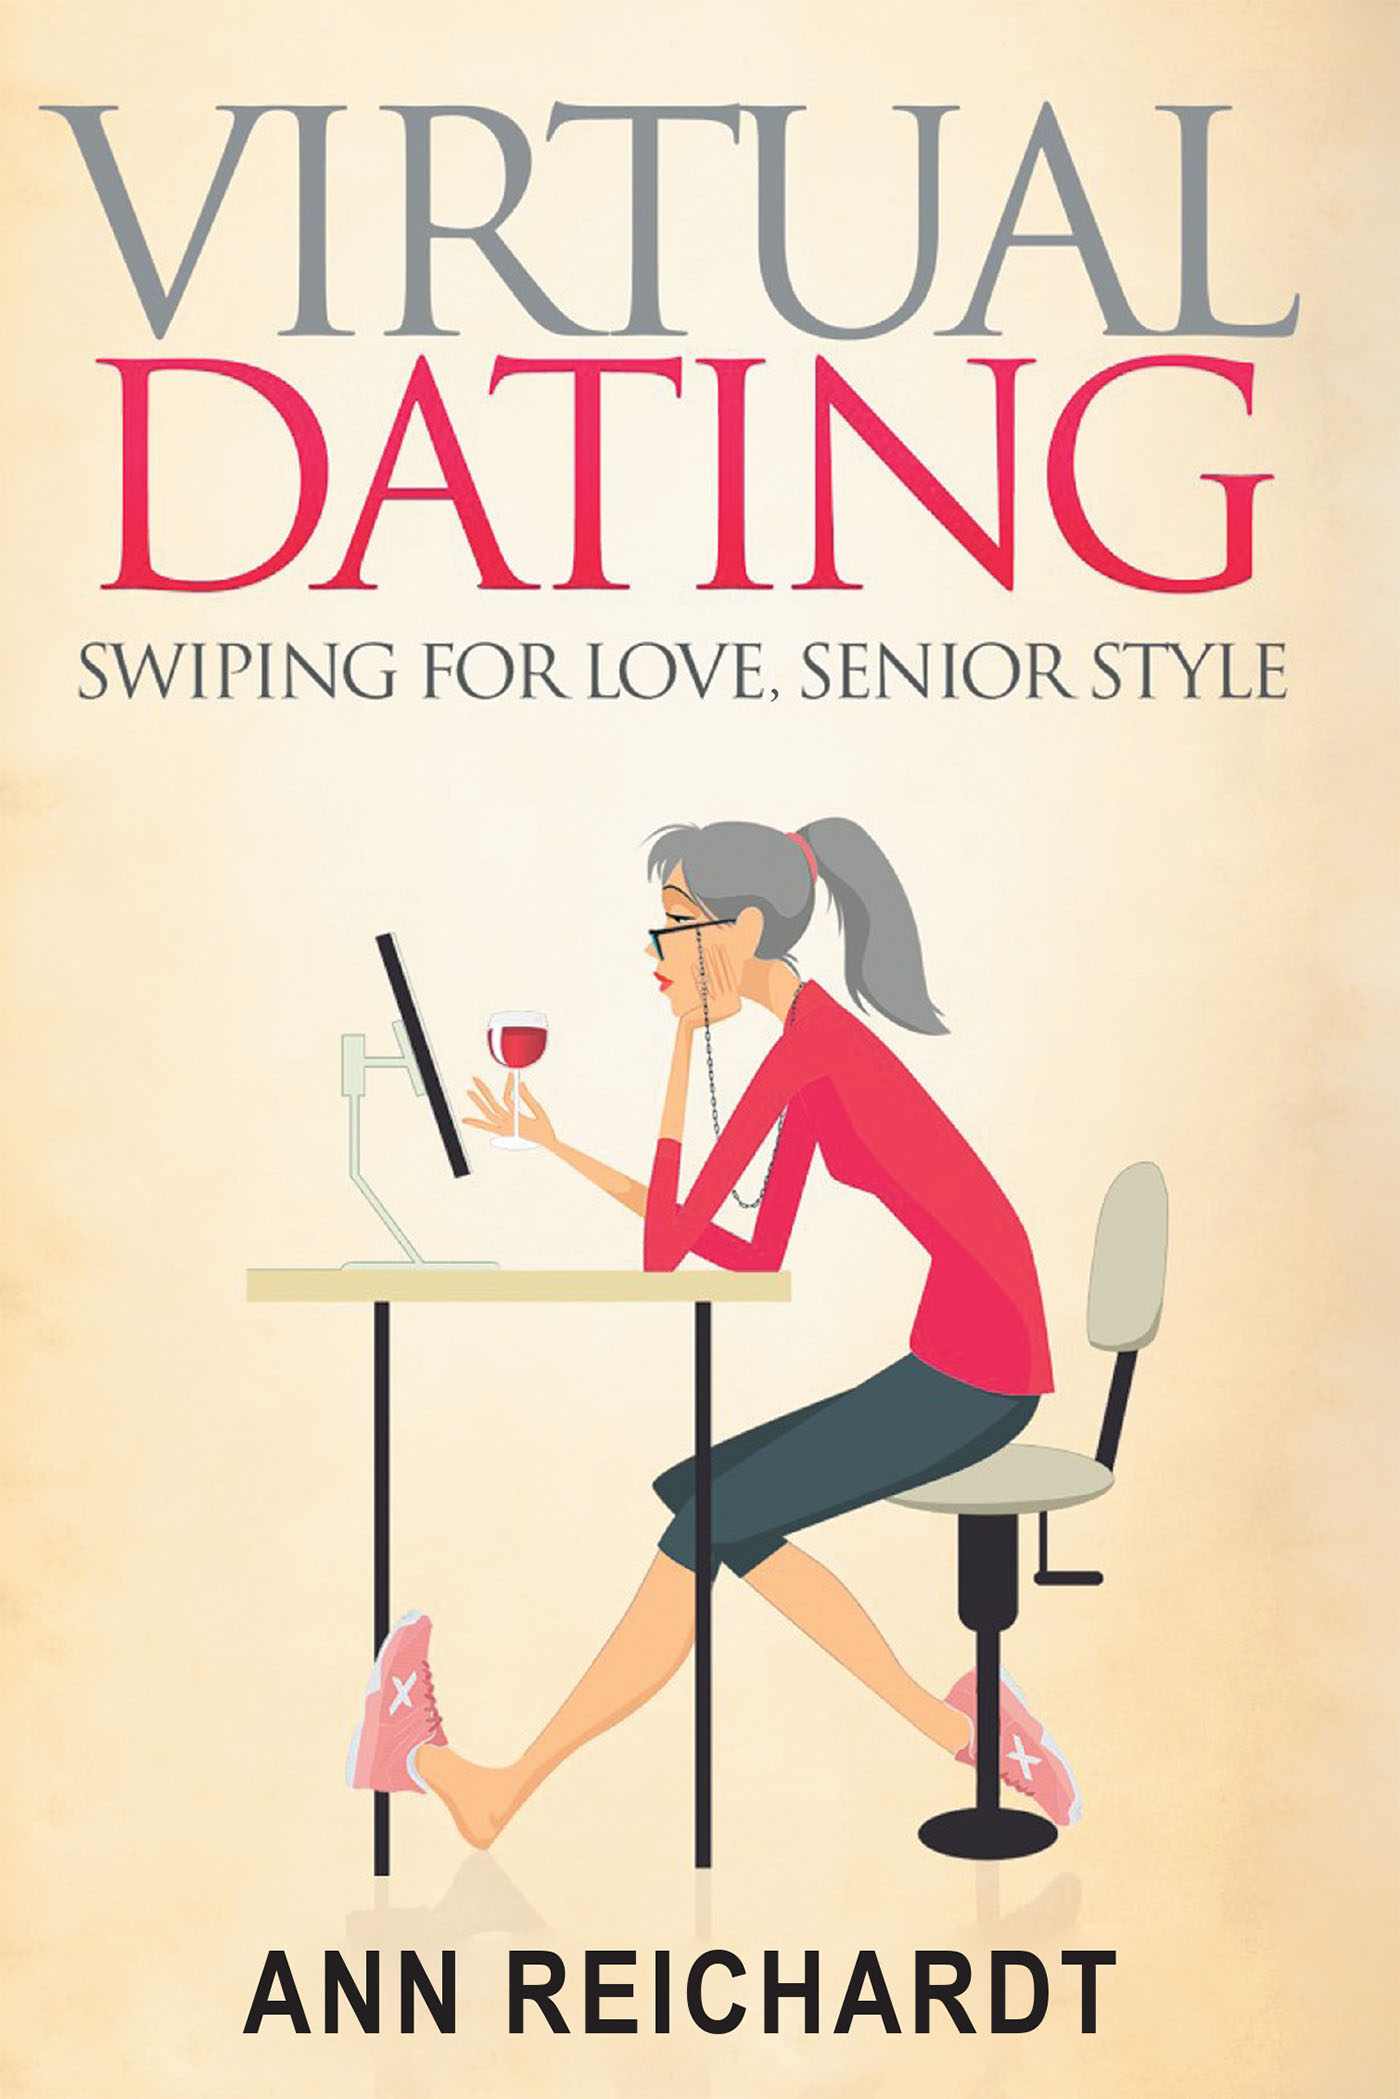 Author Ann Reichardt’s New Book, "Virtual Dating: Swiping for Love, Senior Style," Centers Around the Author's Attempts to Master Internet Dating as a Single Senior